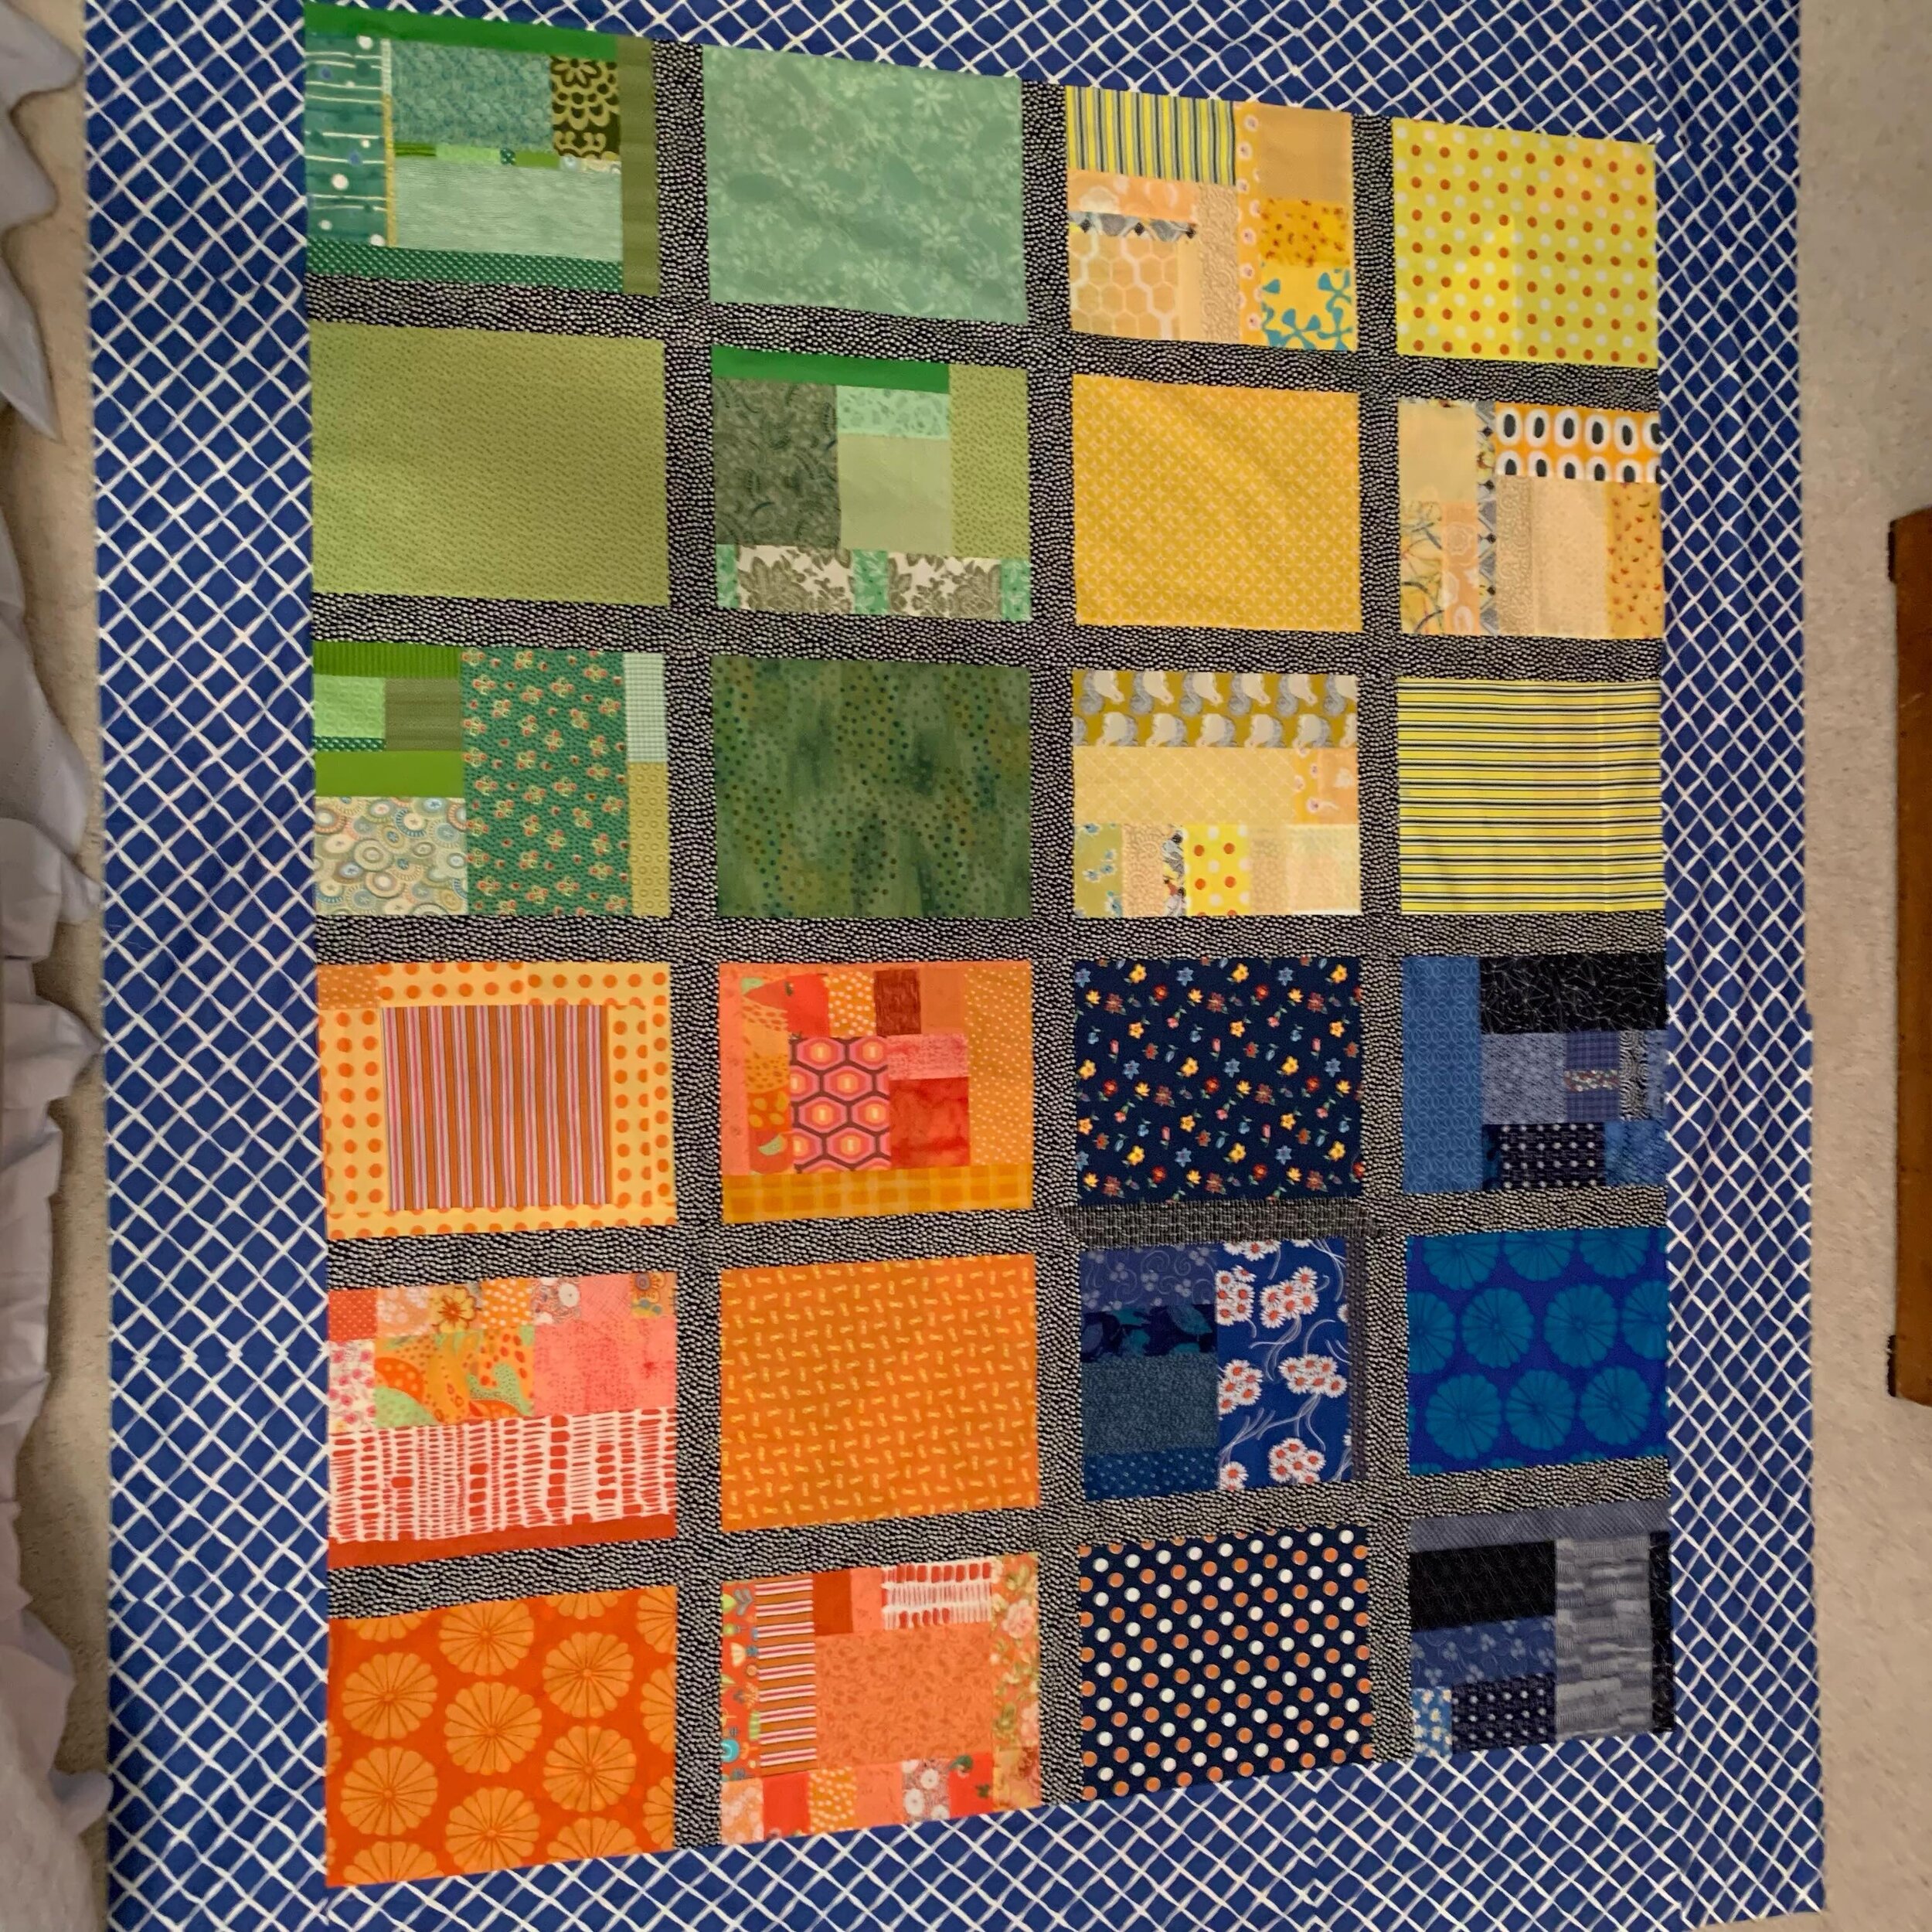 #igquiltfest Day 11&ndash;Quilt backs. I almost always stitch leftover fabric into quilt backs, typically with little attempt at artistry. But I gave this back a little more thought-it was intended as the back of a picnic quilt, but I ended up liking